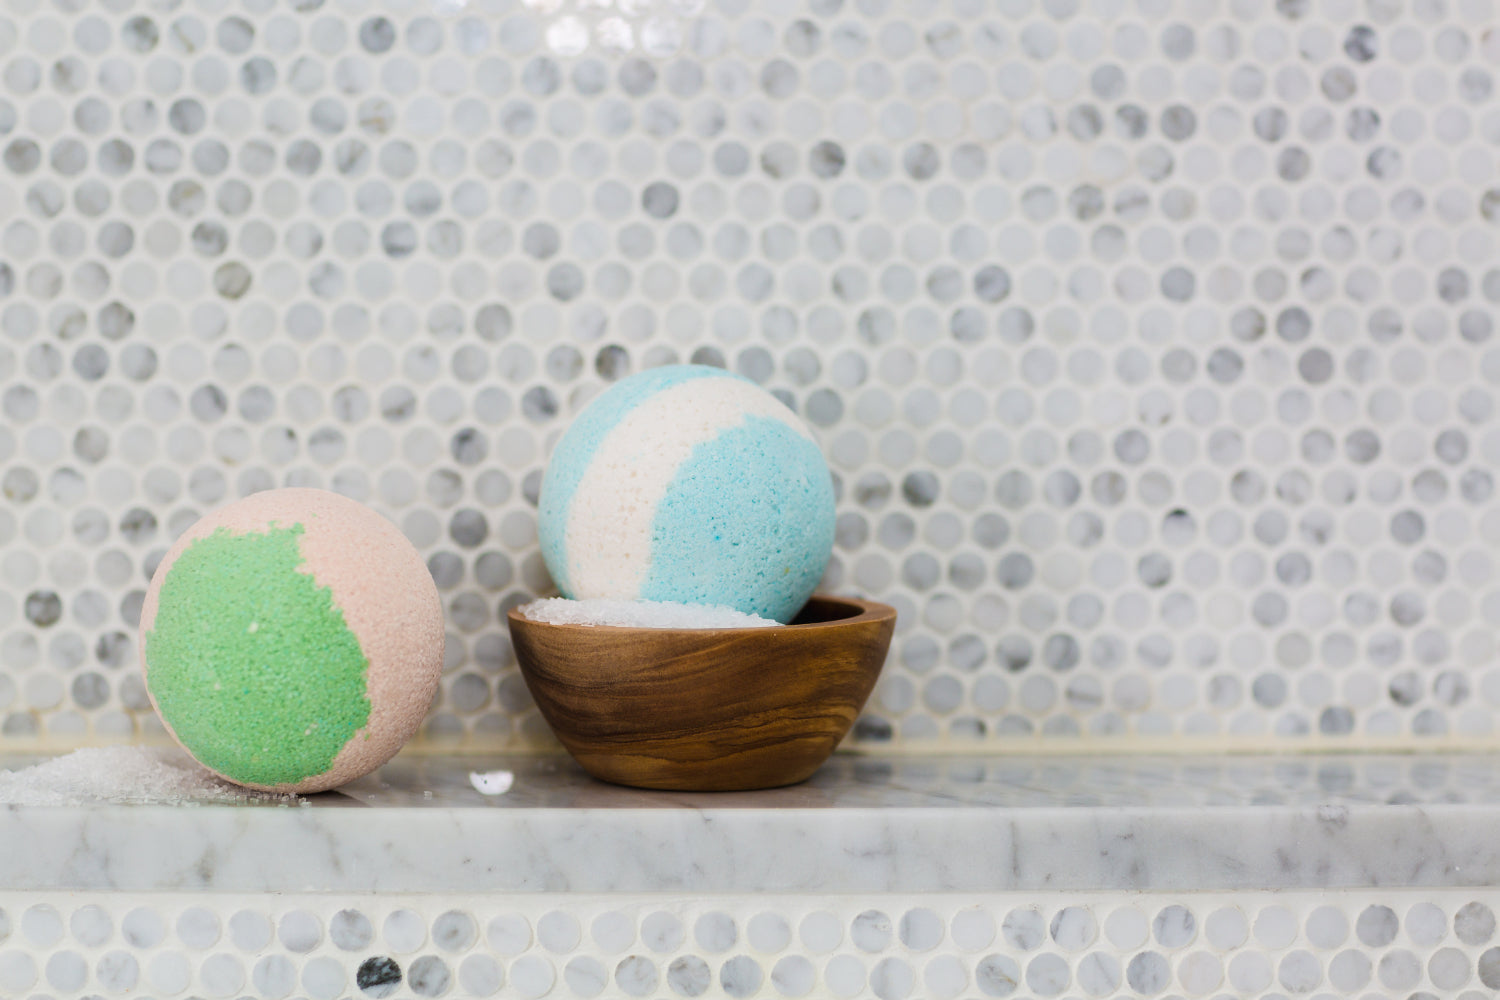 Two bath fizzies sit on the edge of a tub